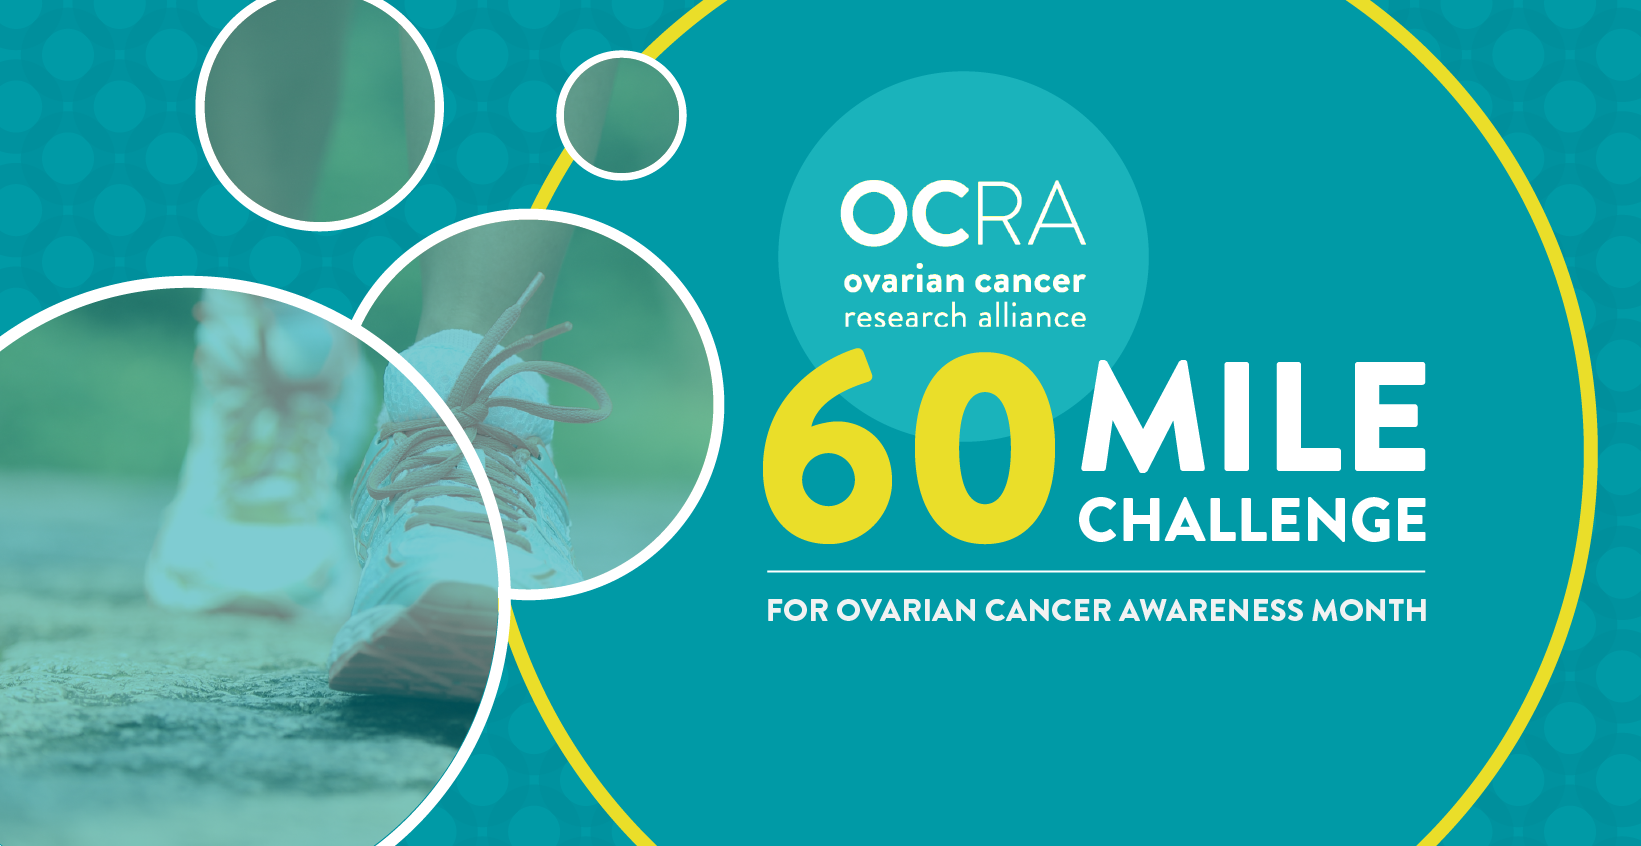 teal and yellow graphic with text that reads, "OCRA Ovarian Cancer Research Alliance, 60 Mile Challenge for Ovarian Cancer Awareness Month"